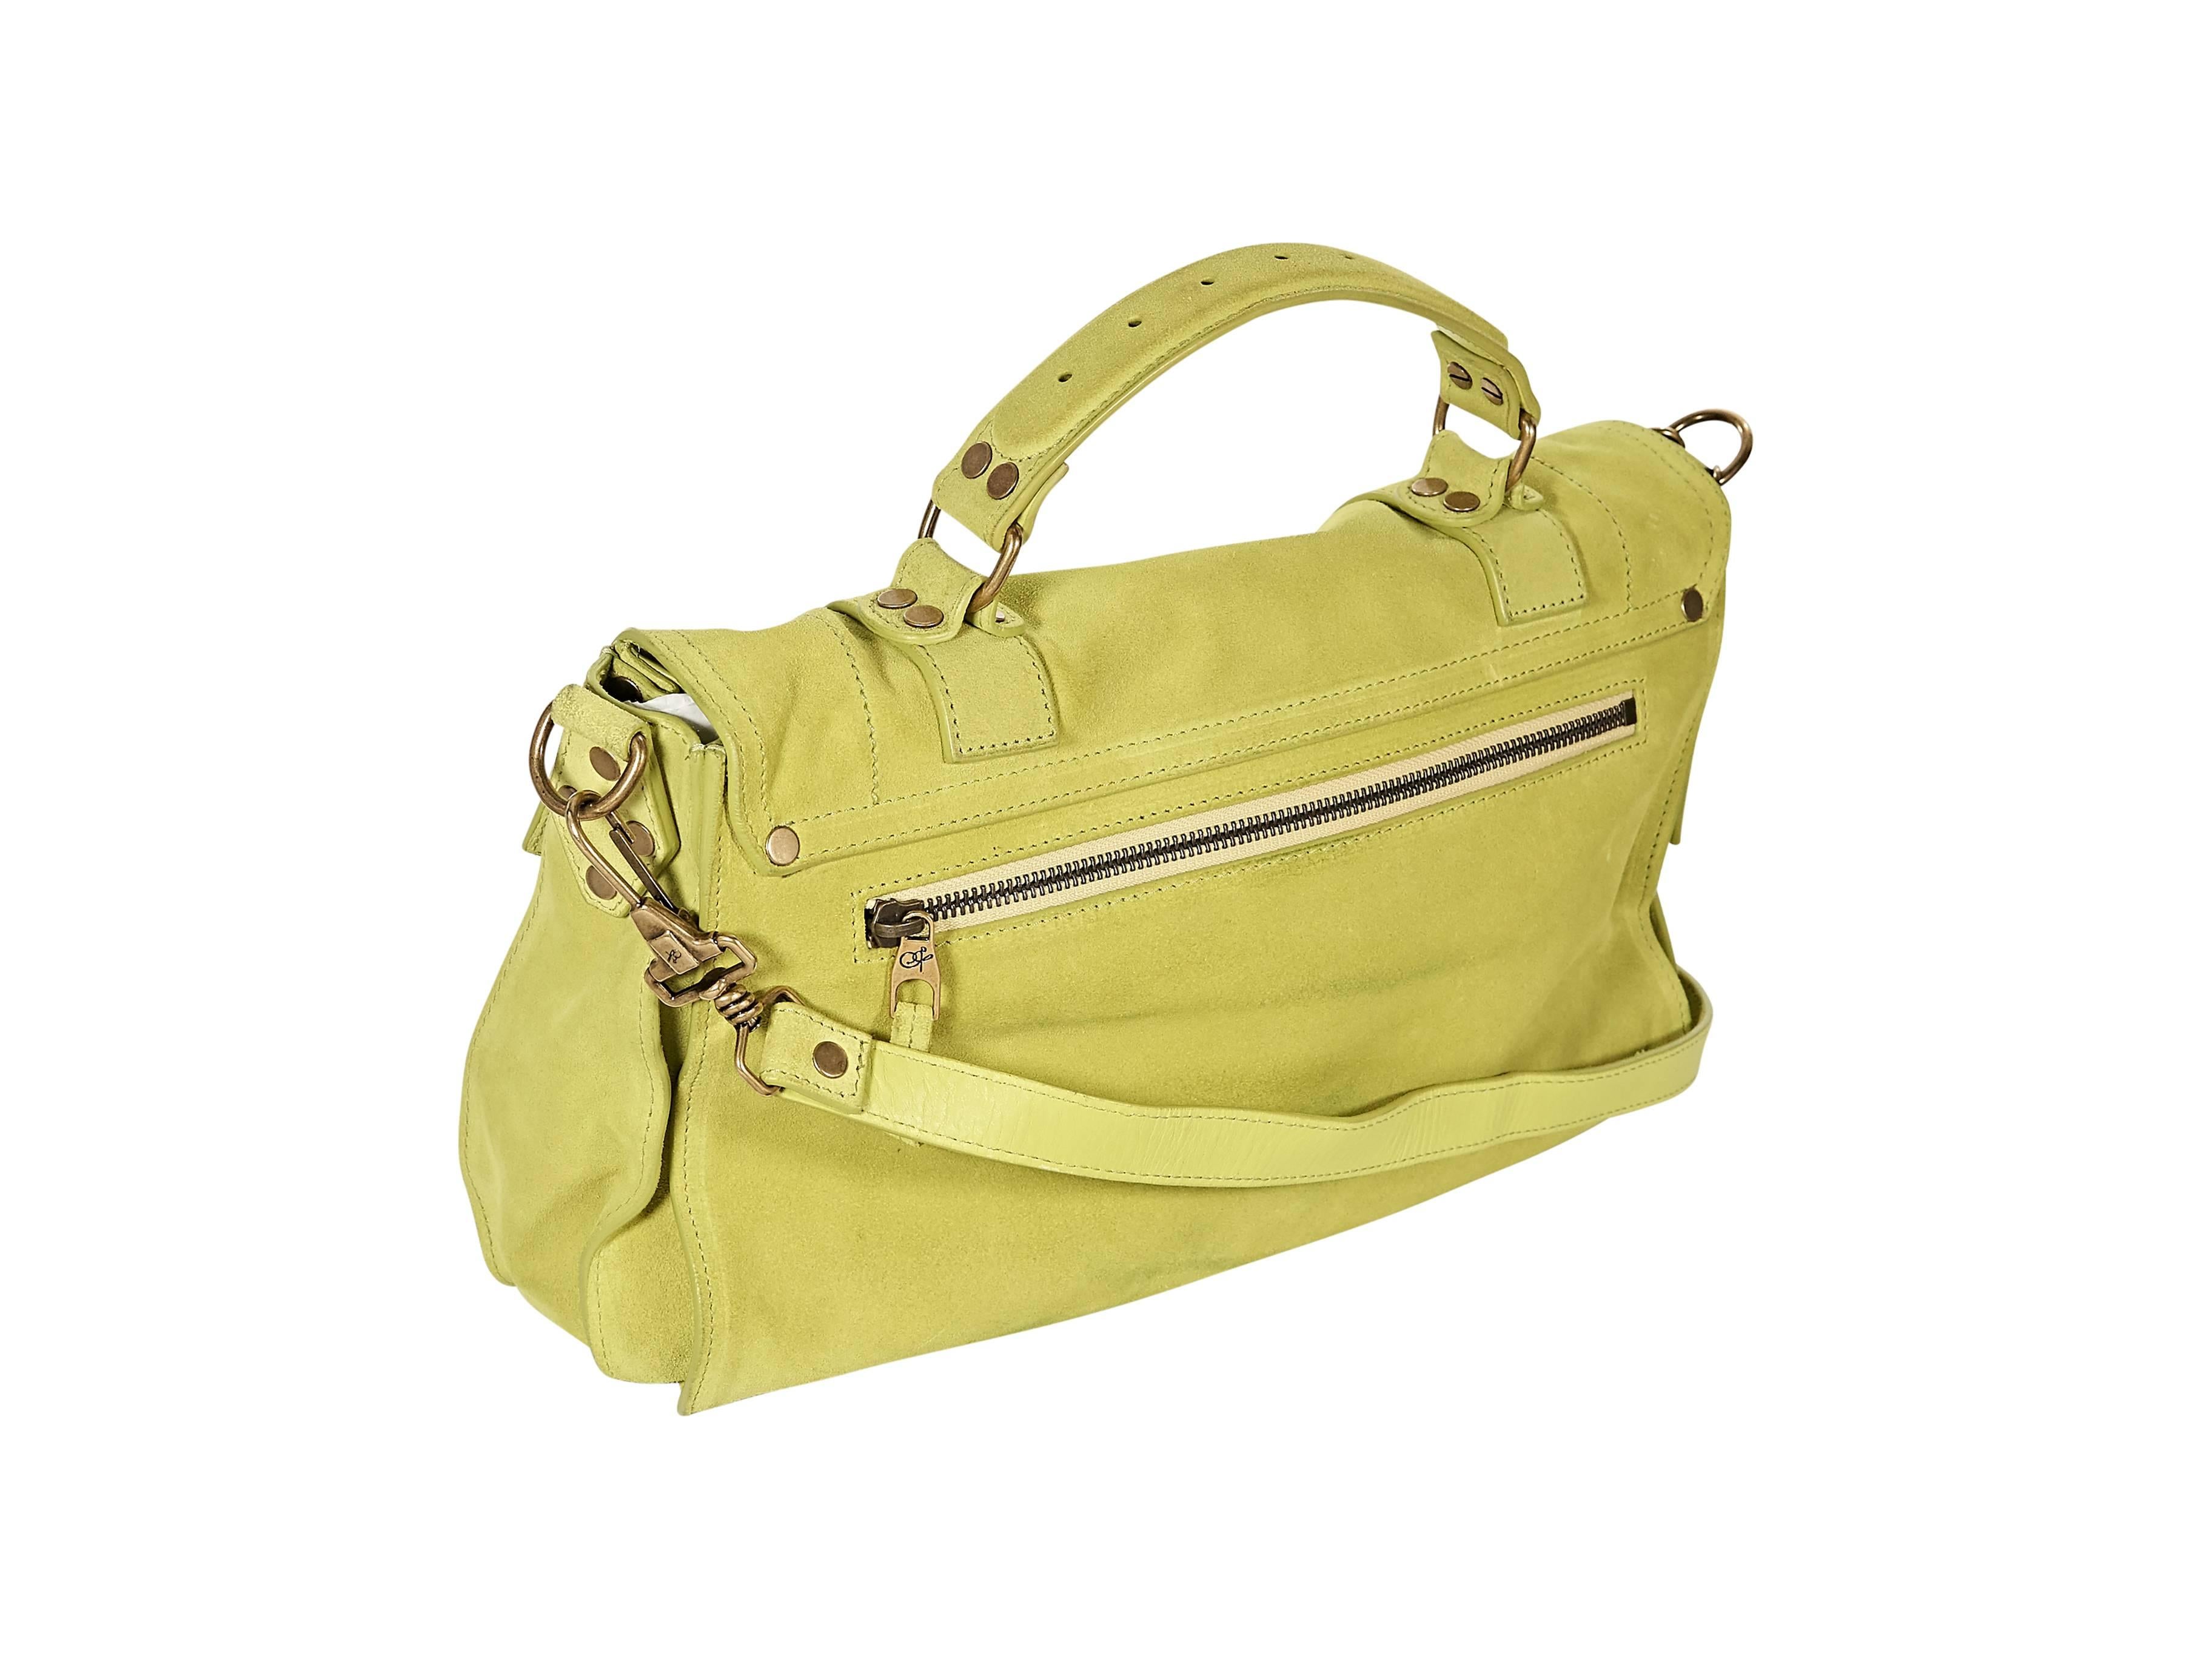 Product details: Lime green medium PS1 suede satchel by Proenza Schouler. Top carry handle. Detachable, adjustable crossbody strap. Zip and slide pockets under front flap. Flip-lock and double strap closure. Back exterior zip pocket. Lined interior